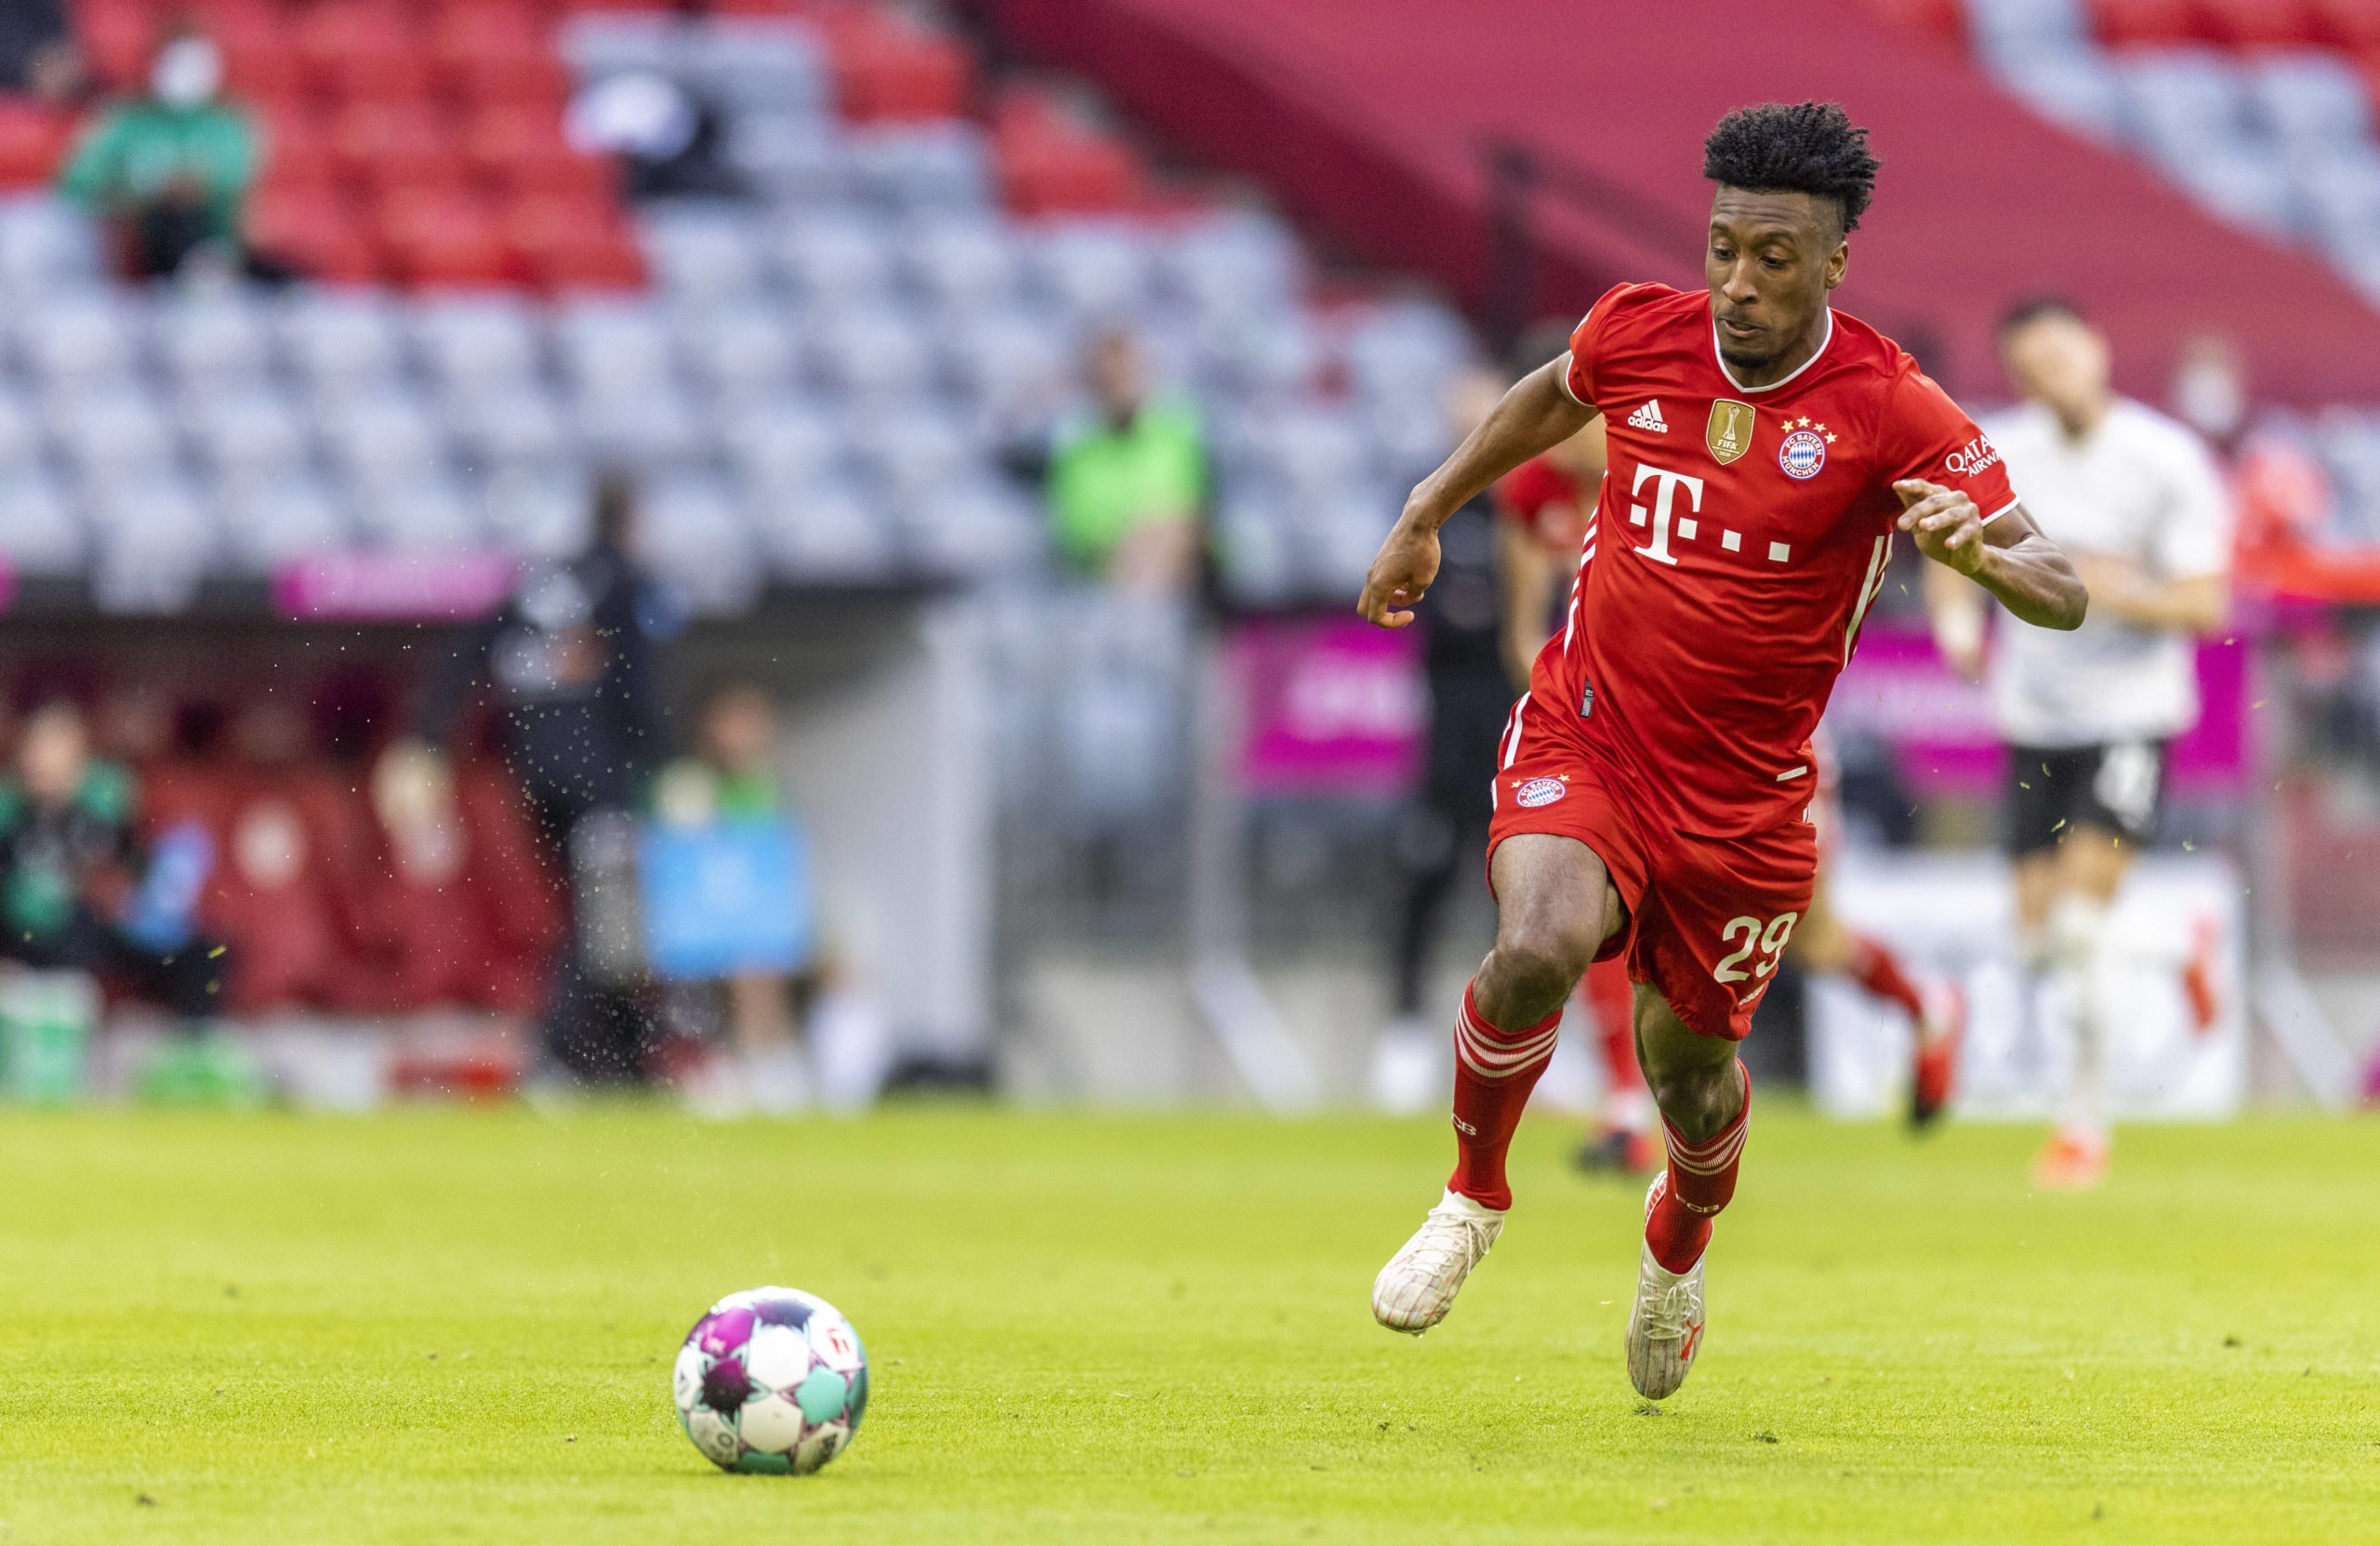 Liverpool locked in a three-way battle for Coman who is seen in the picture